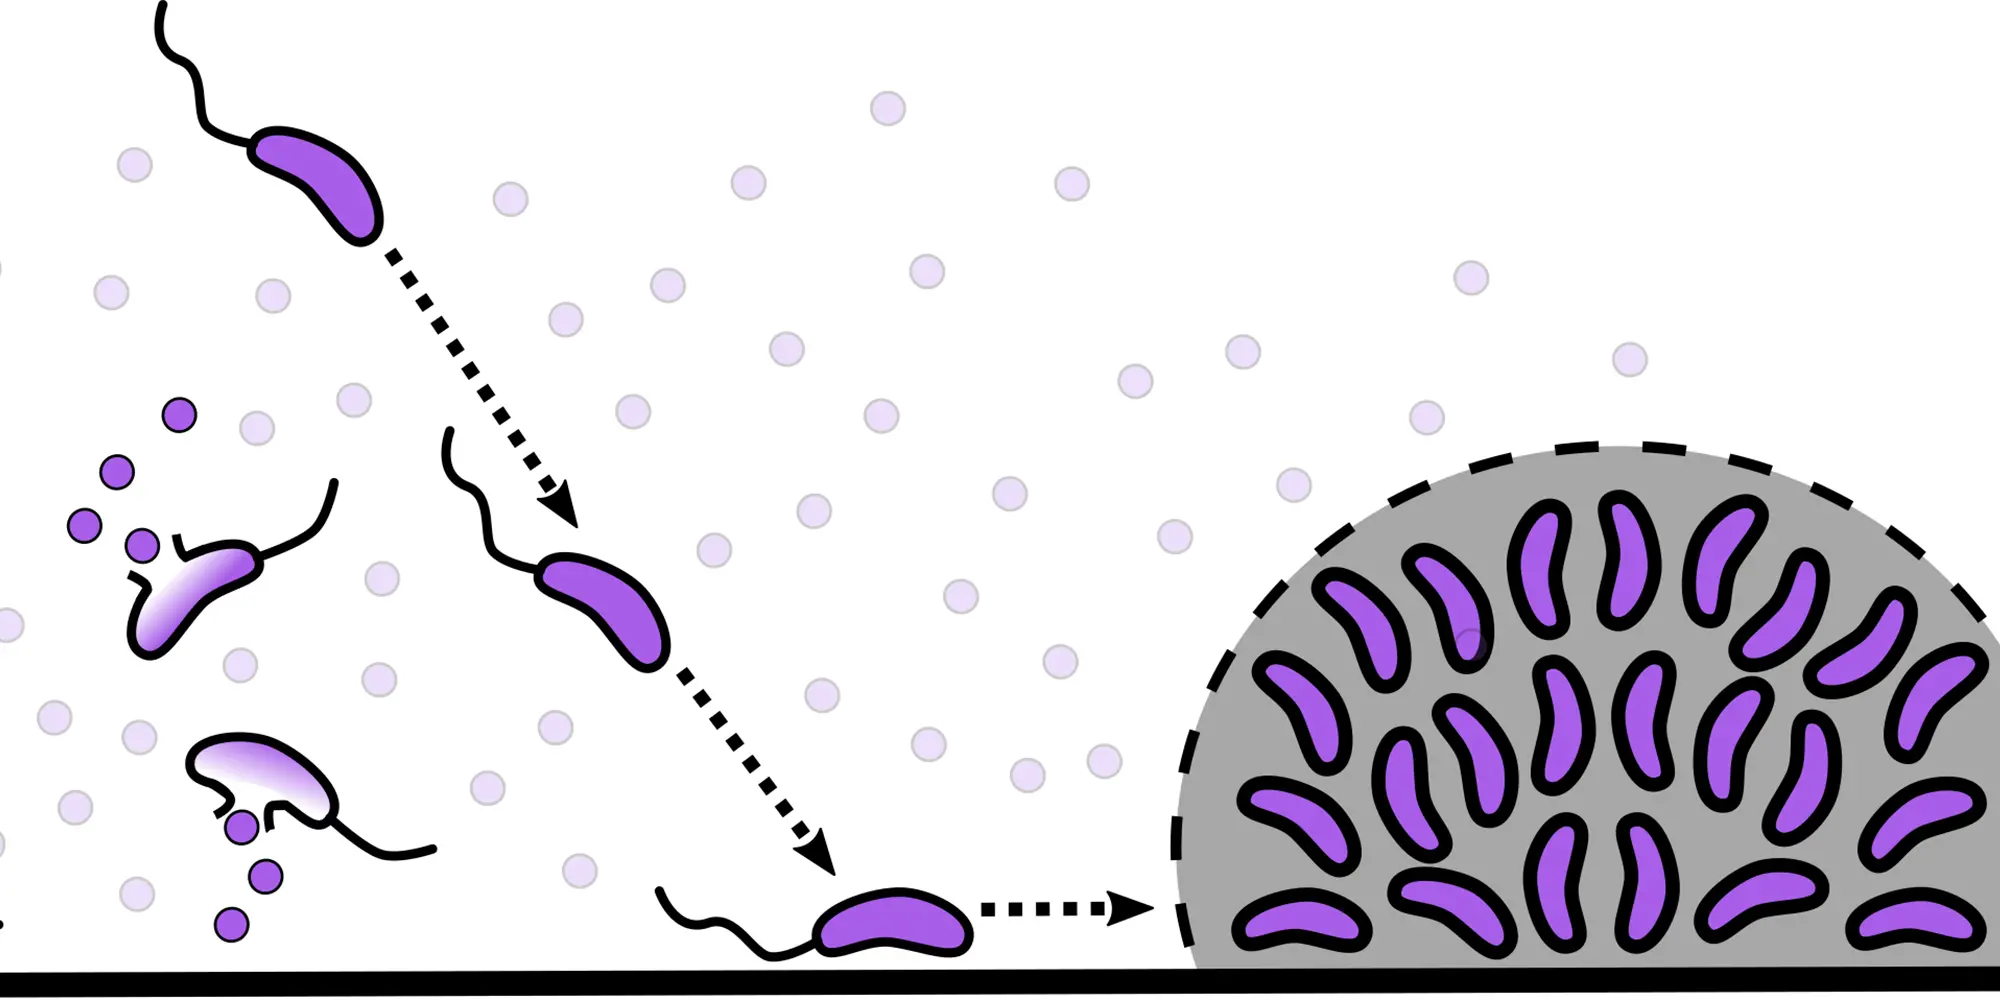 When V. cholerae sense the death or injury of any bacteria in the Vibrio genus, they clump together to form a protective biofilm.